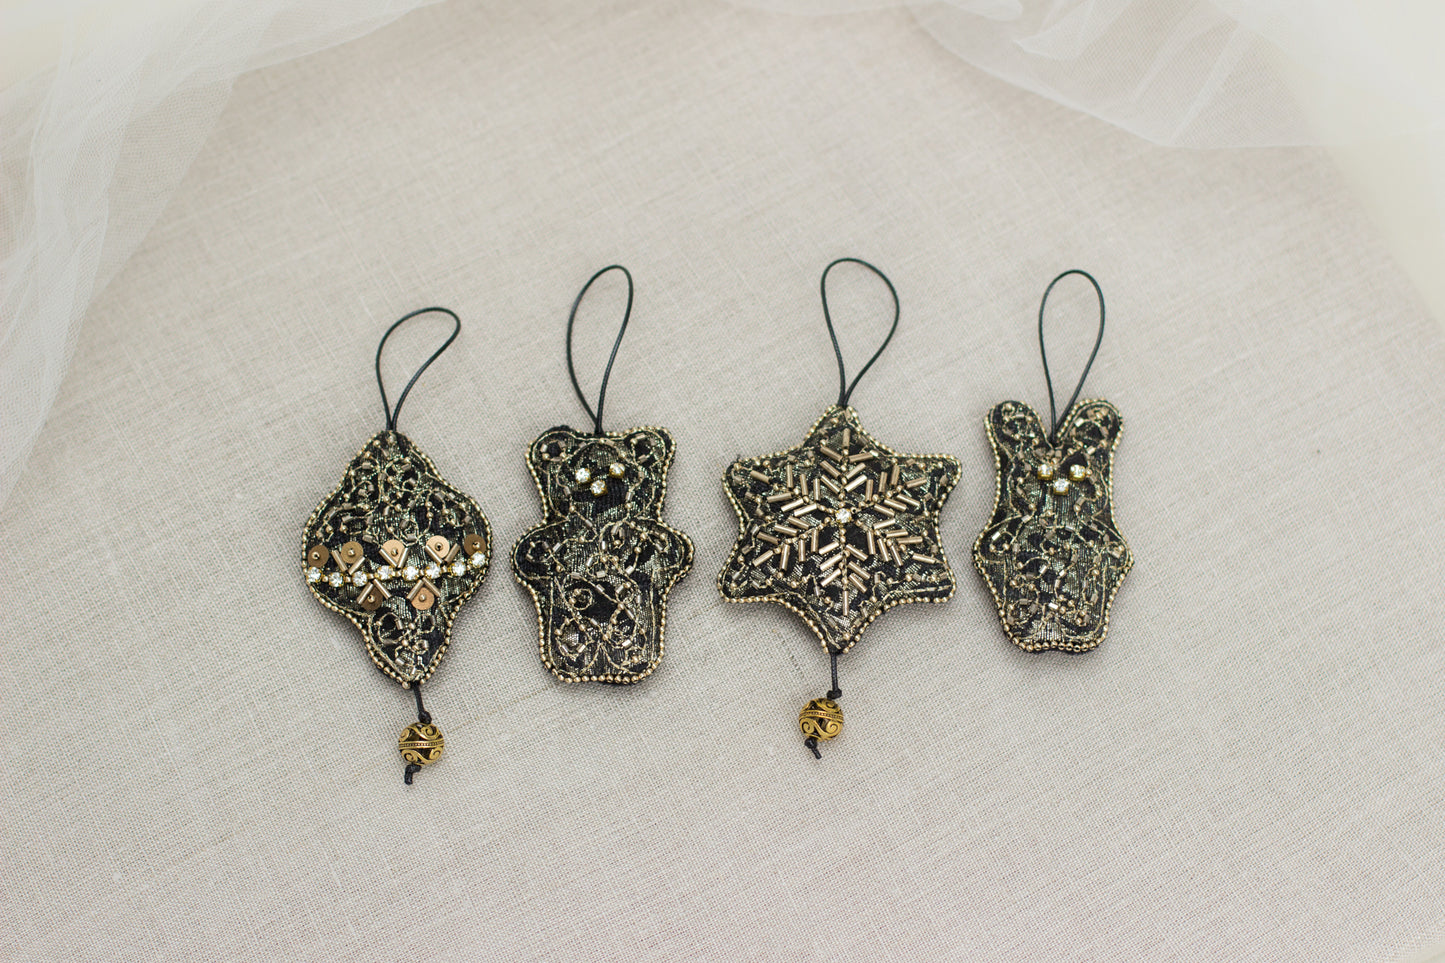 Set of four handmade Christmas ornaments. A gold & black Christmas tree decorations hand embroidered with crystals & seed beads, the back side finished with black velour. Jeweled Christmas ornaments.